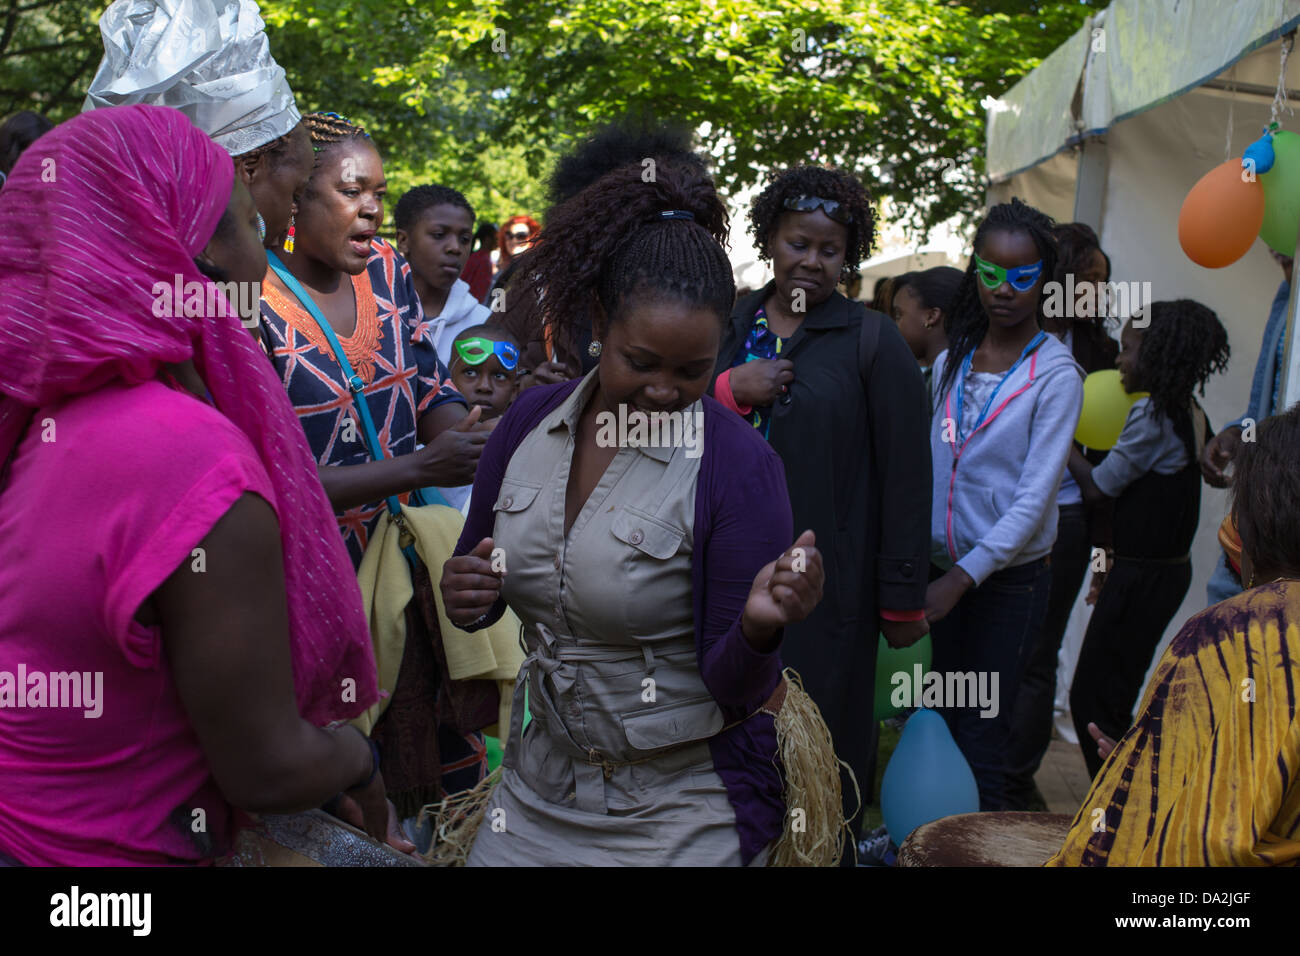 African women perform a traditional African dance during Africa Day festival. Stock Photo